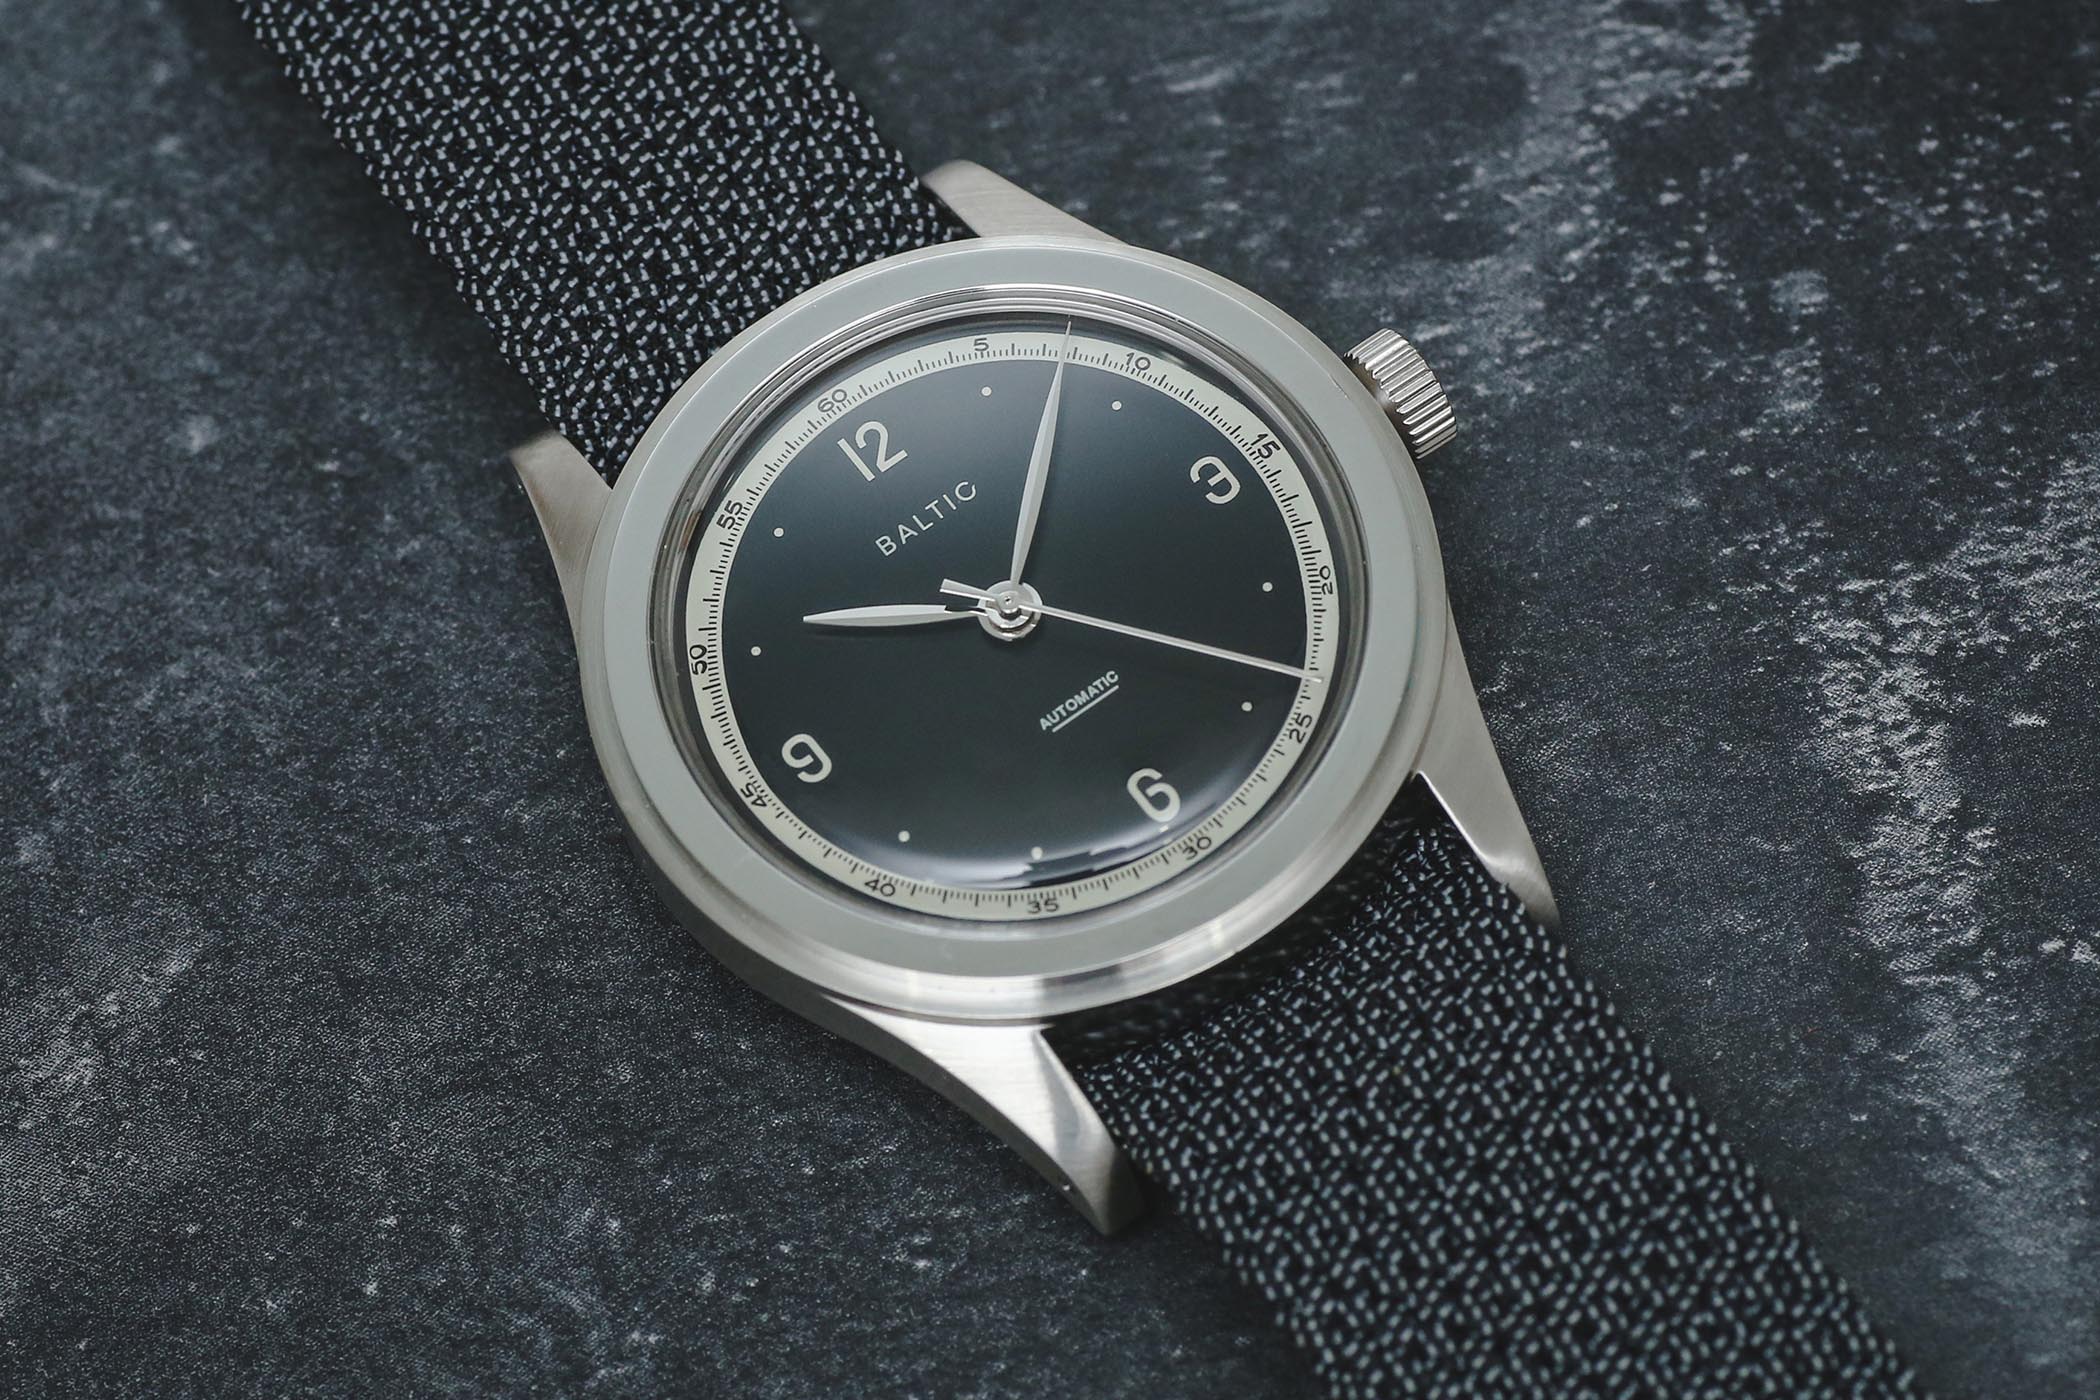 Baltic Watches HMS 001